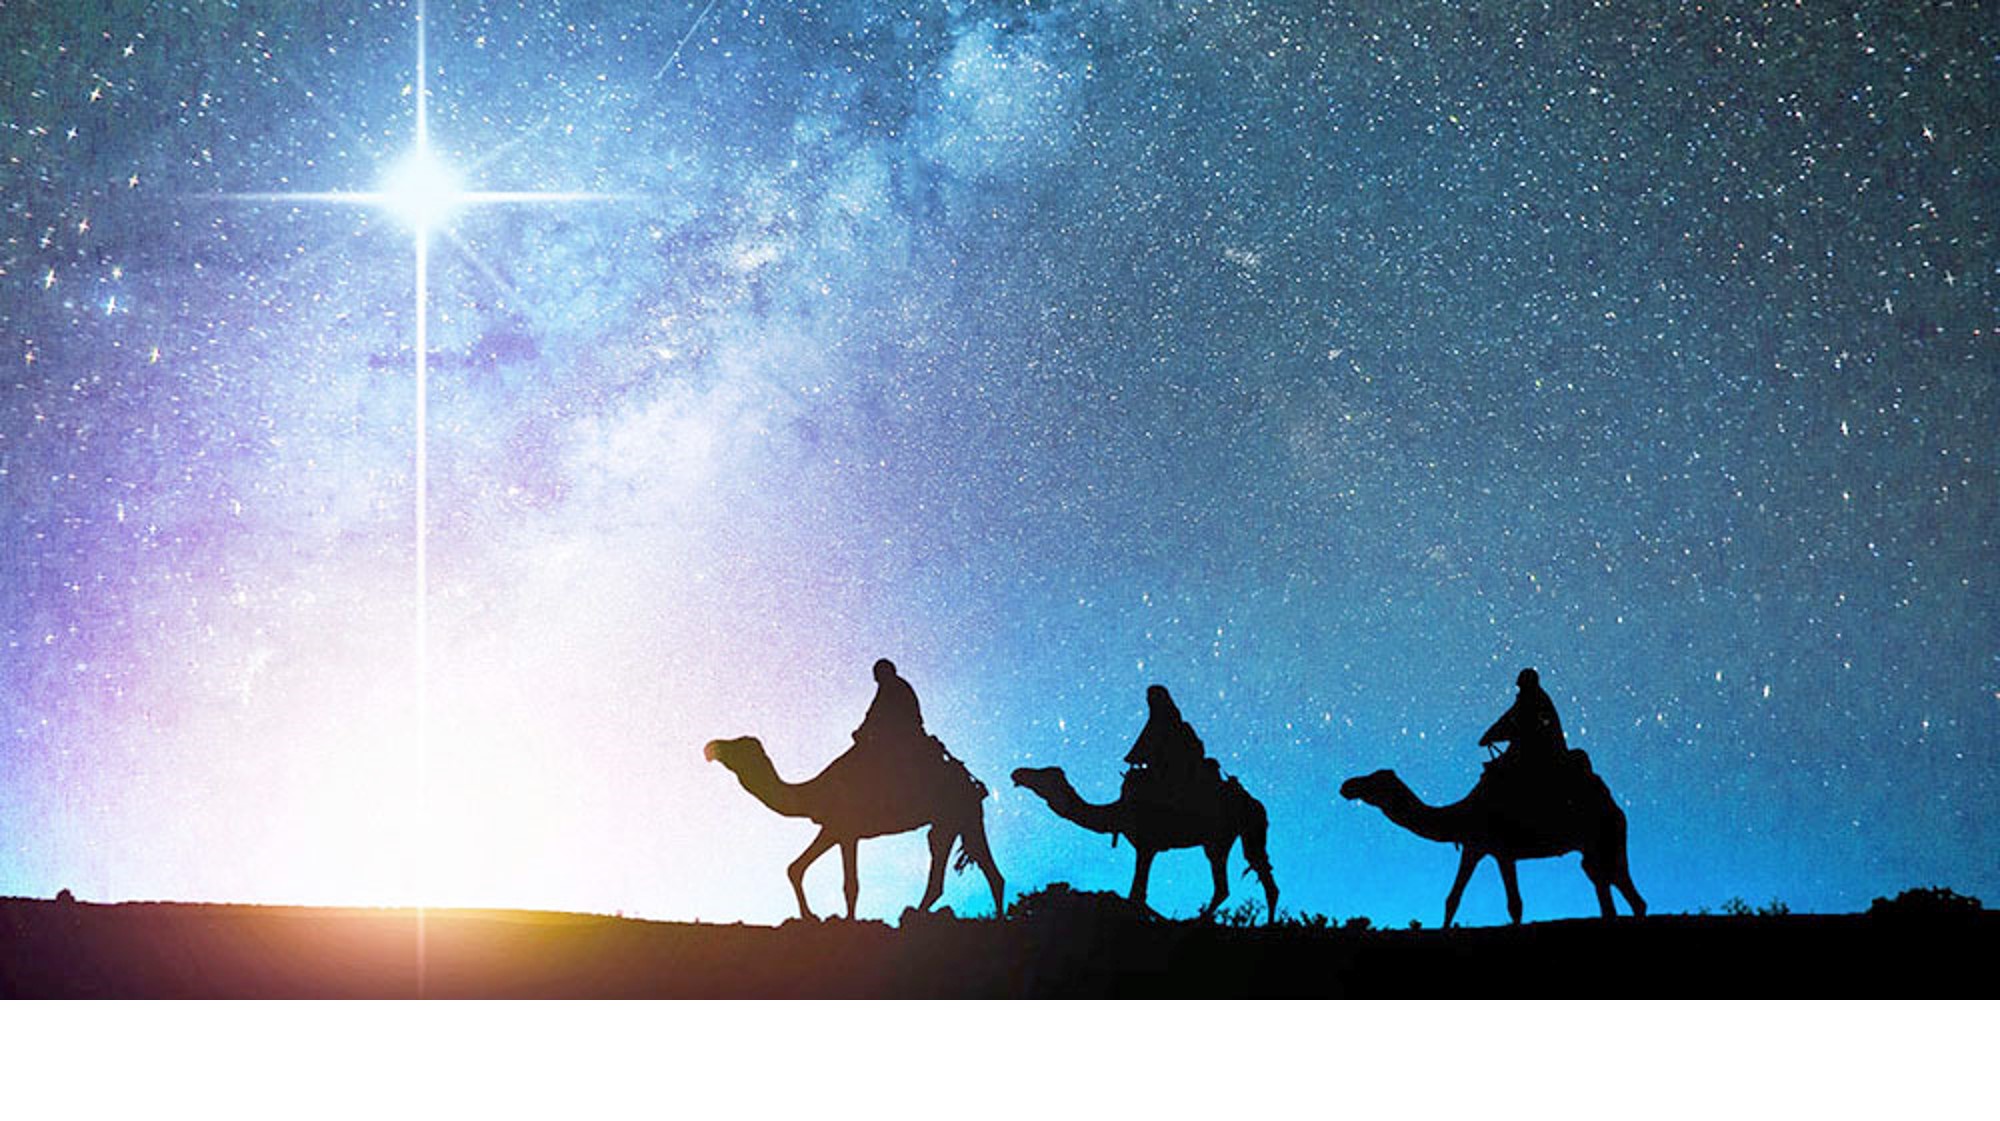 Three Wise Men against a blue night sky following the star